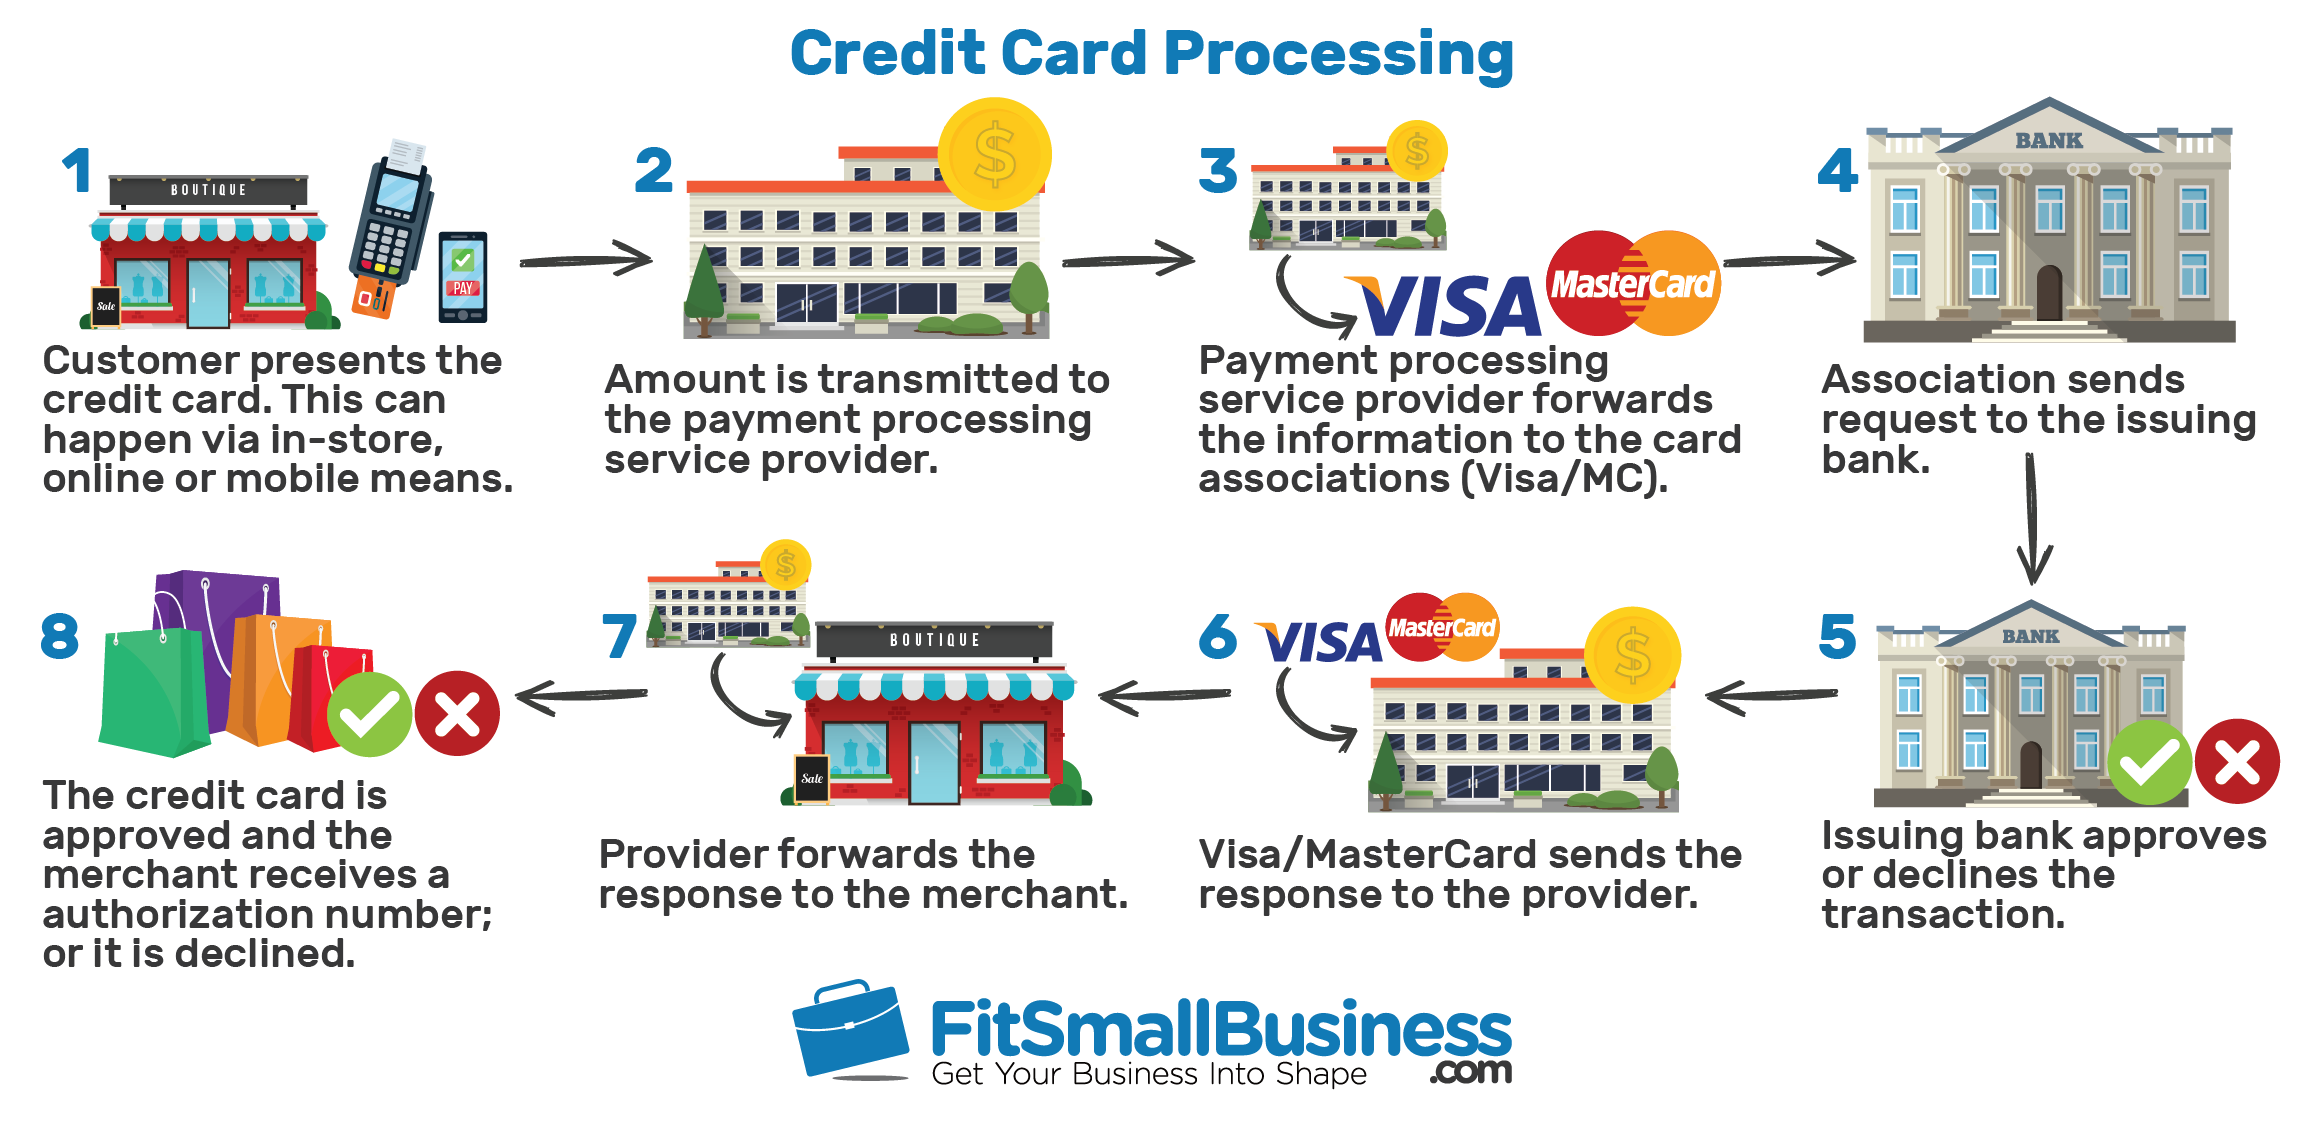 Anatomy Of A Credit Card Cardholder Name Number Network And More